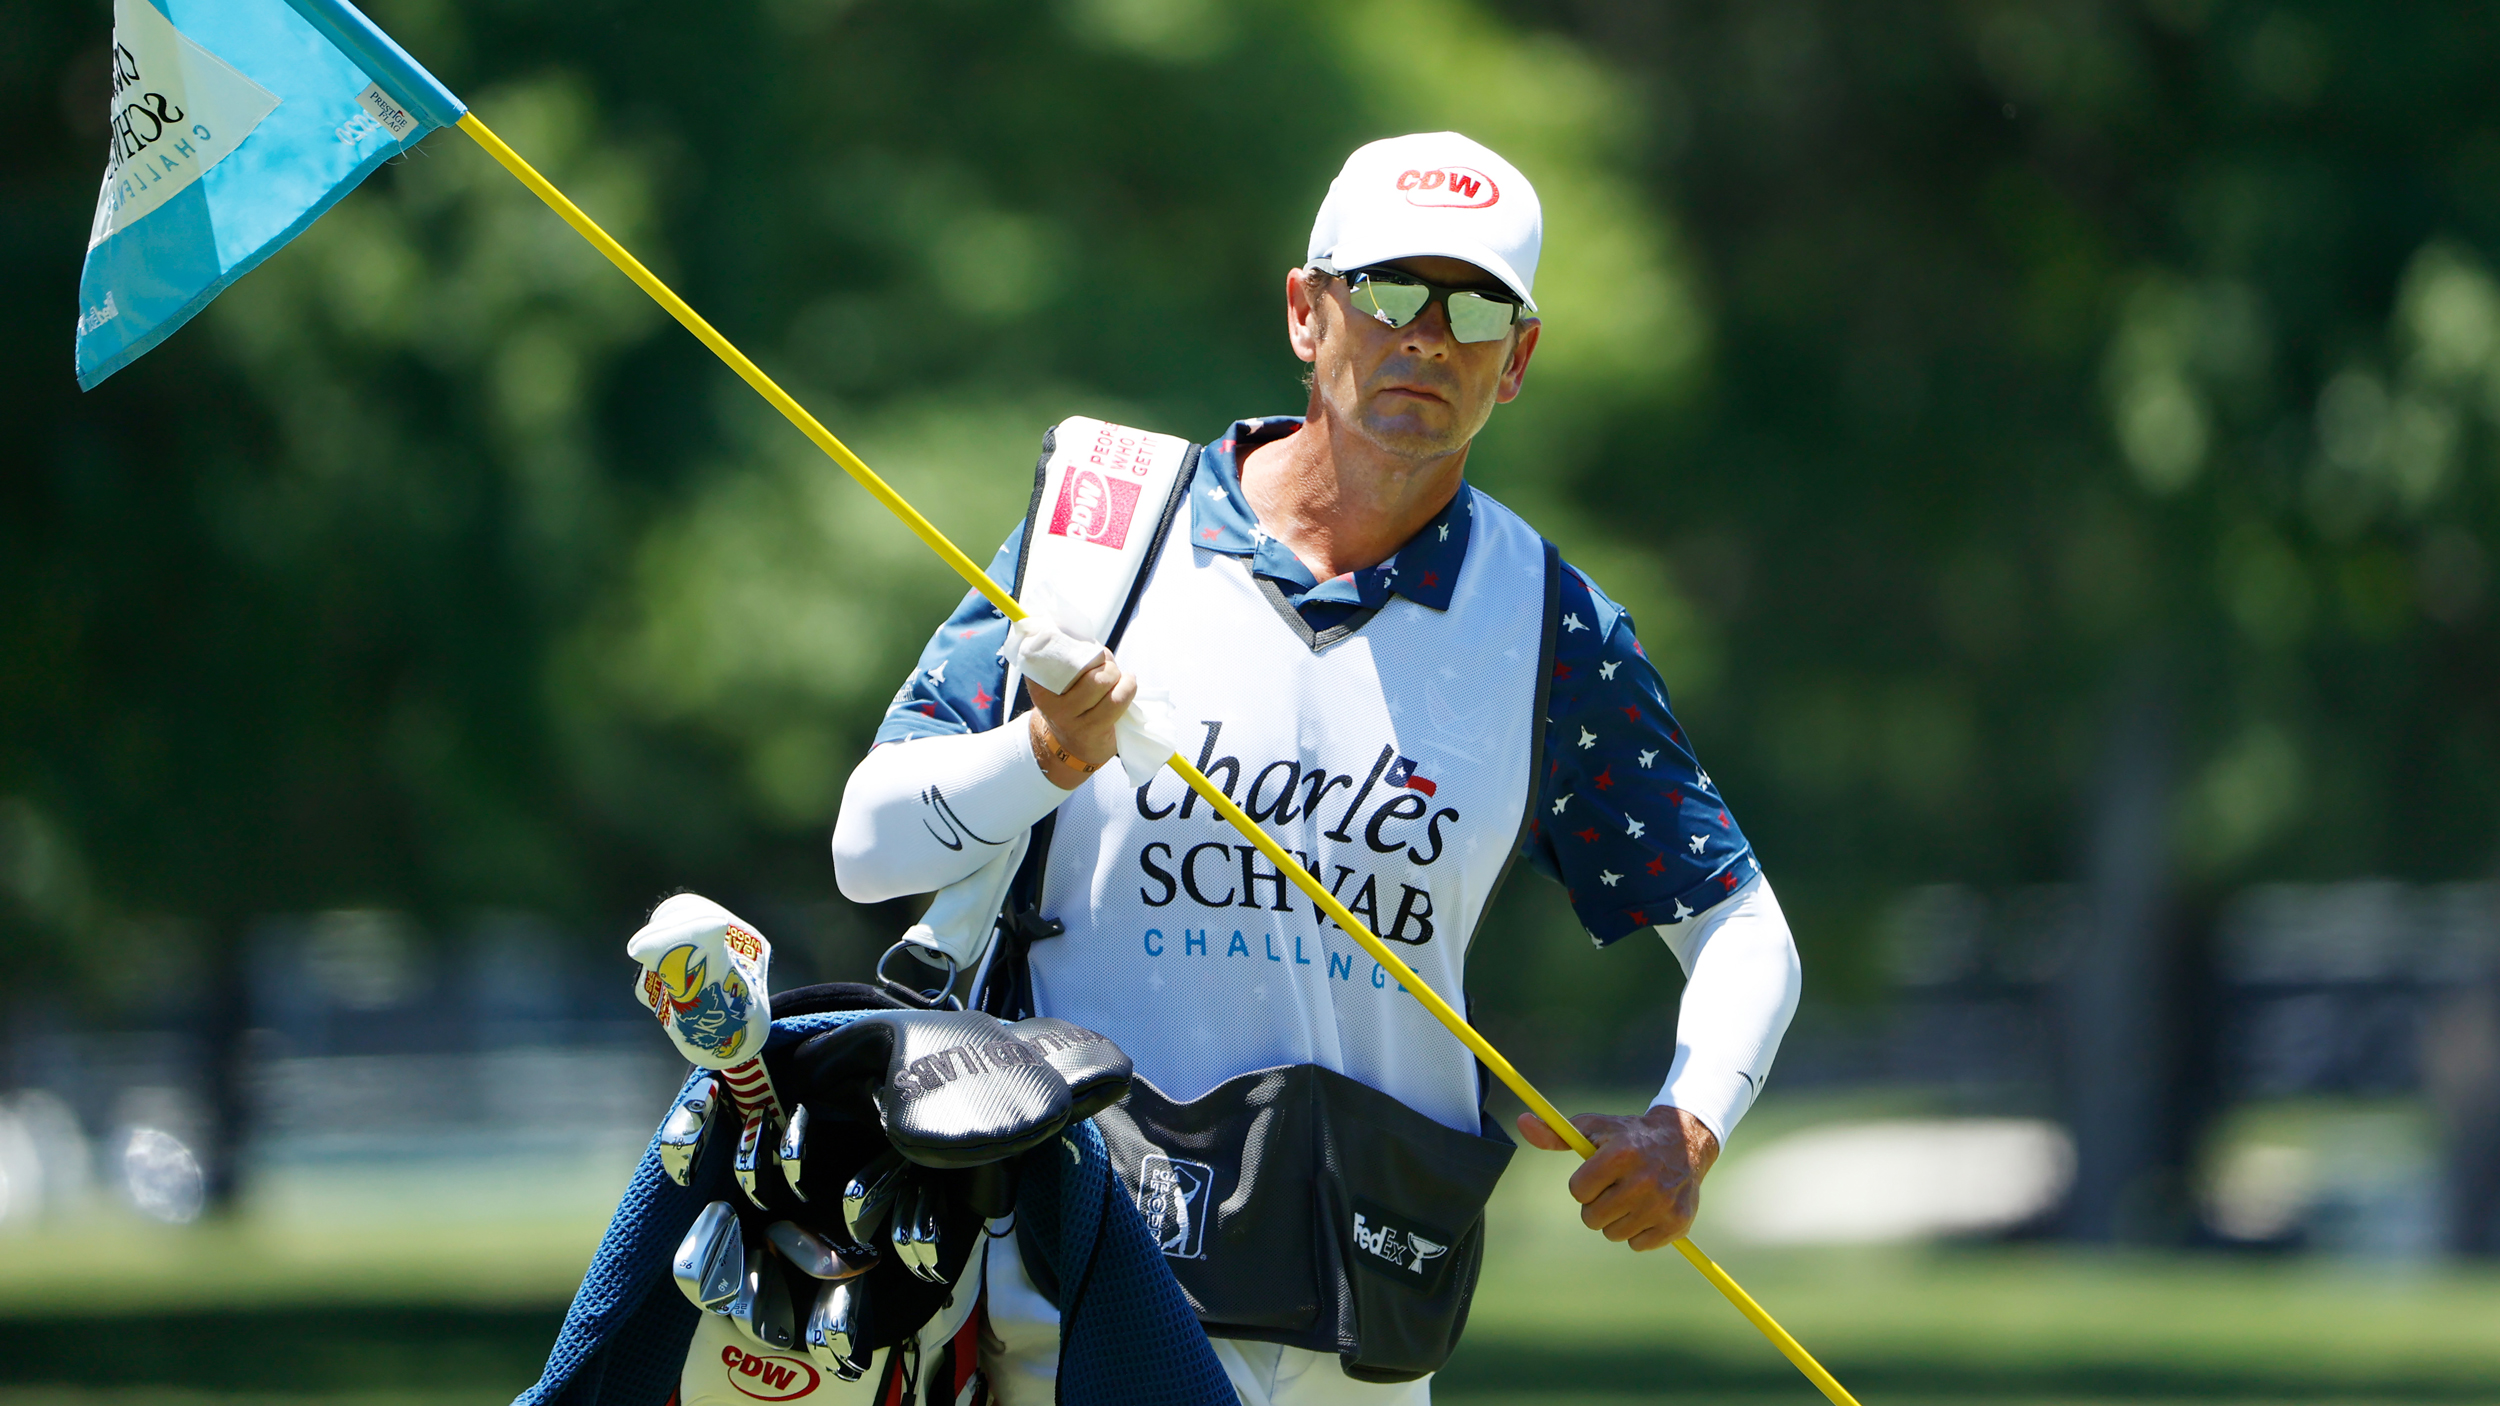 5 ways caddies' jobs will be different this week as the PGA Tour returns